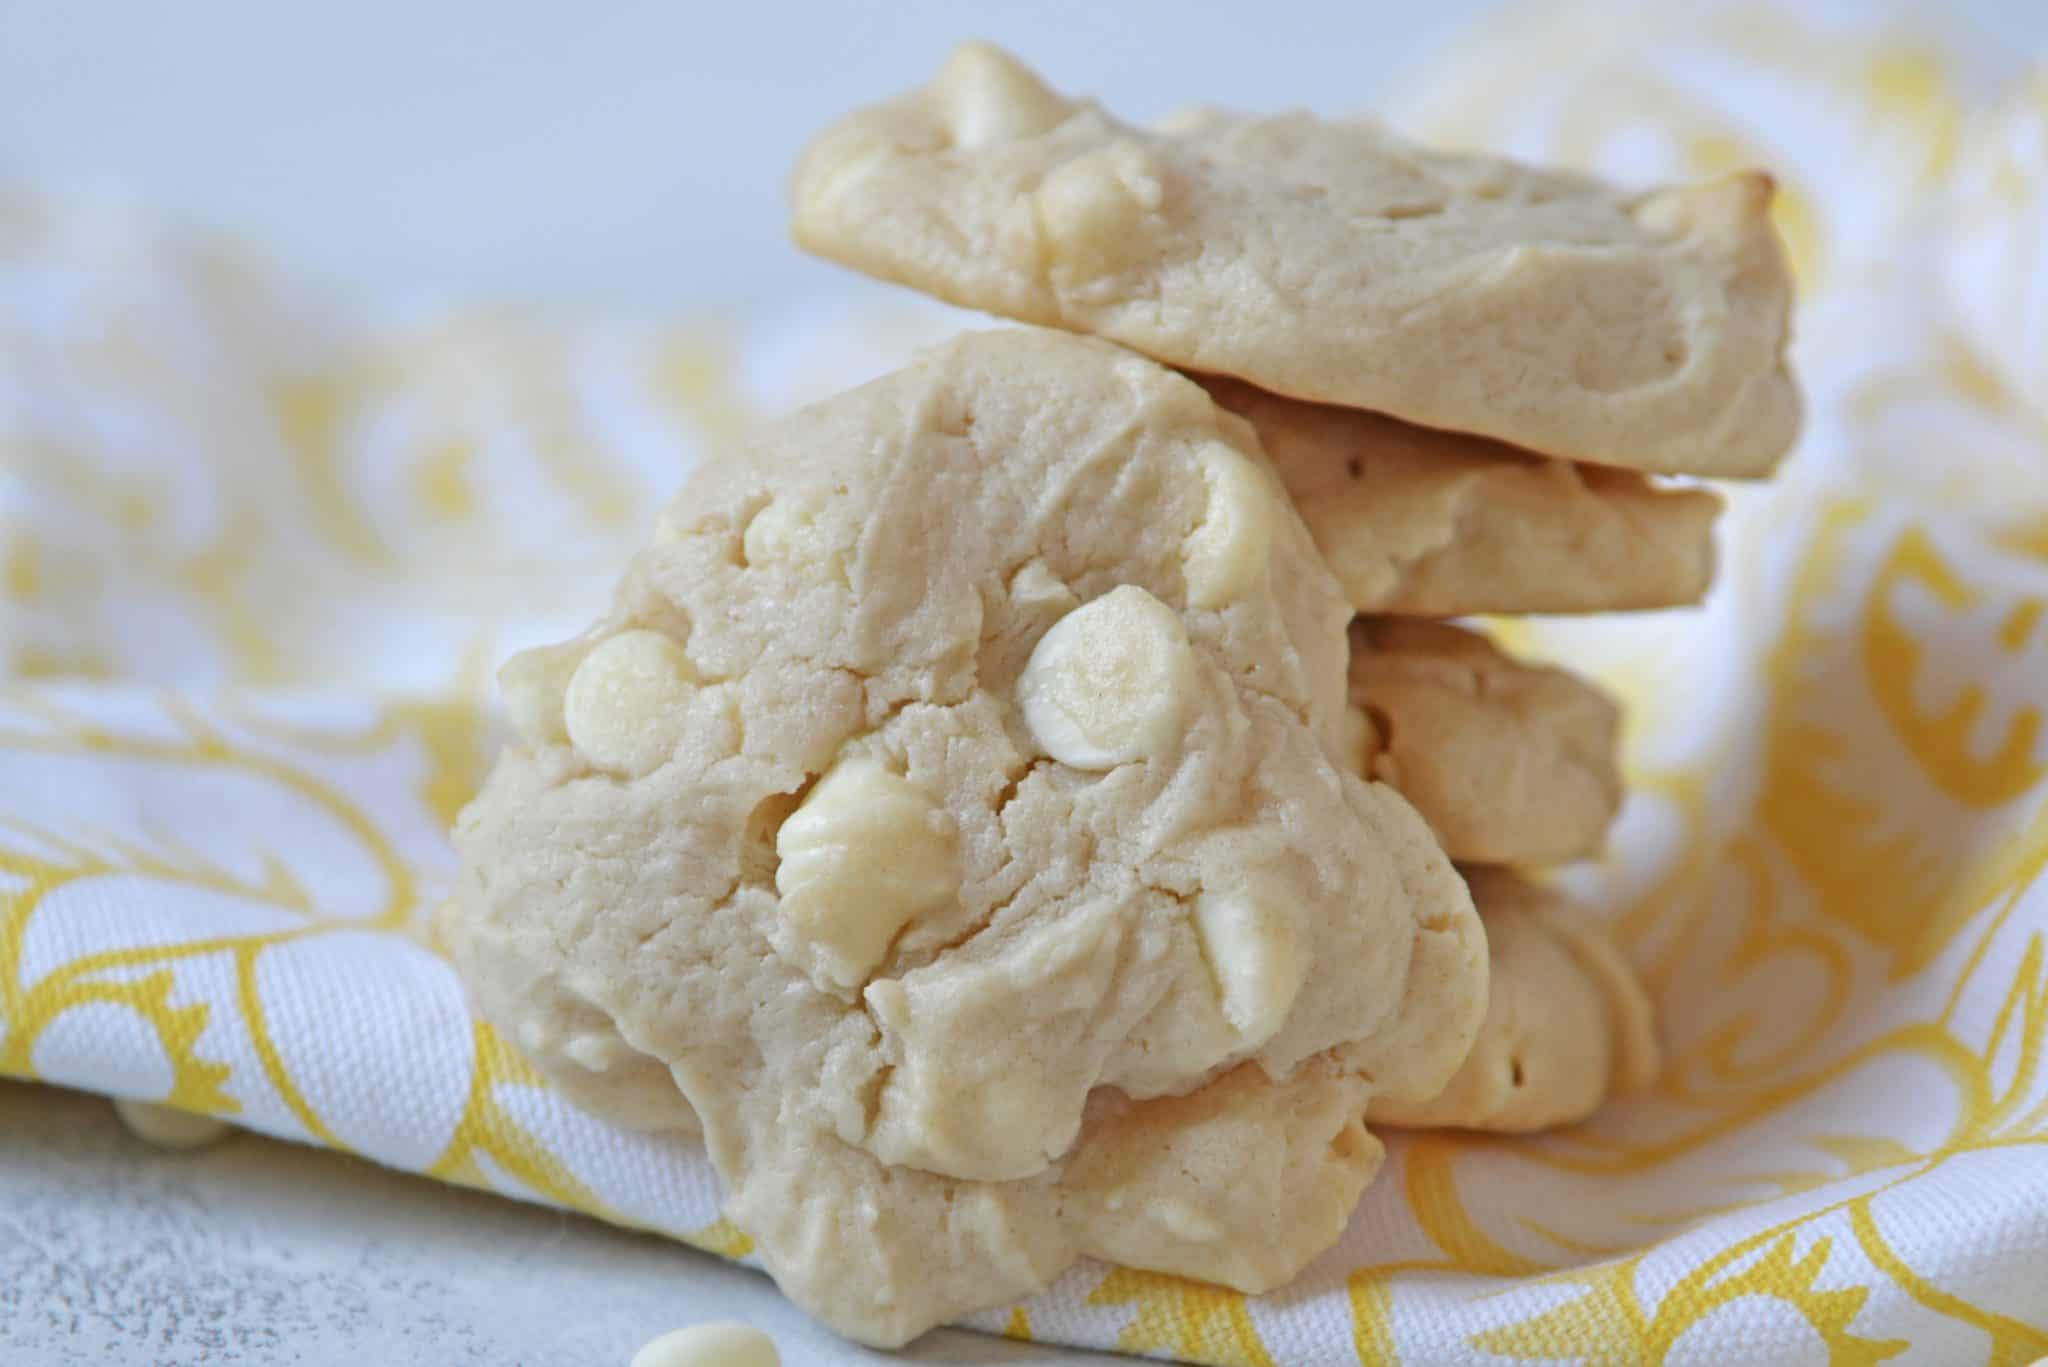 These Lemon White Chocolate Chip Cookies are a cross between a chocolate chip cookie & a lemon sugar cookie! A perfectly fluffy & mouth watering combination! #lemoncookierecipe #lemoncookies #whitechocolatechipcookies www.savoryexperiments.com